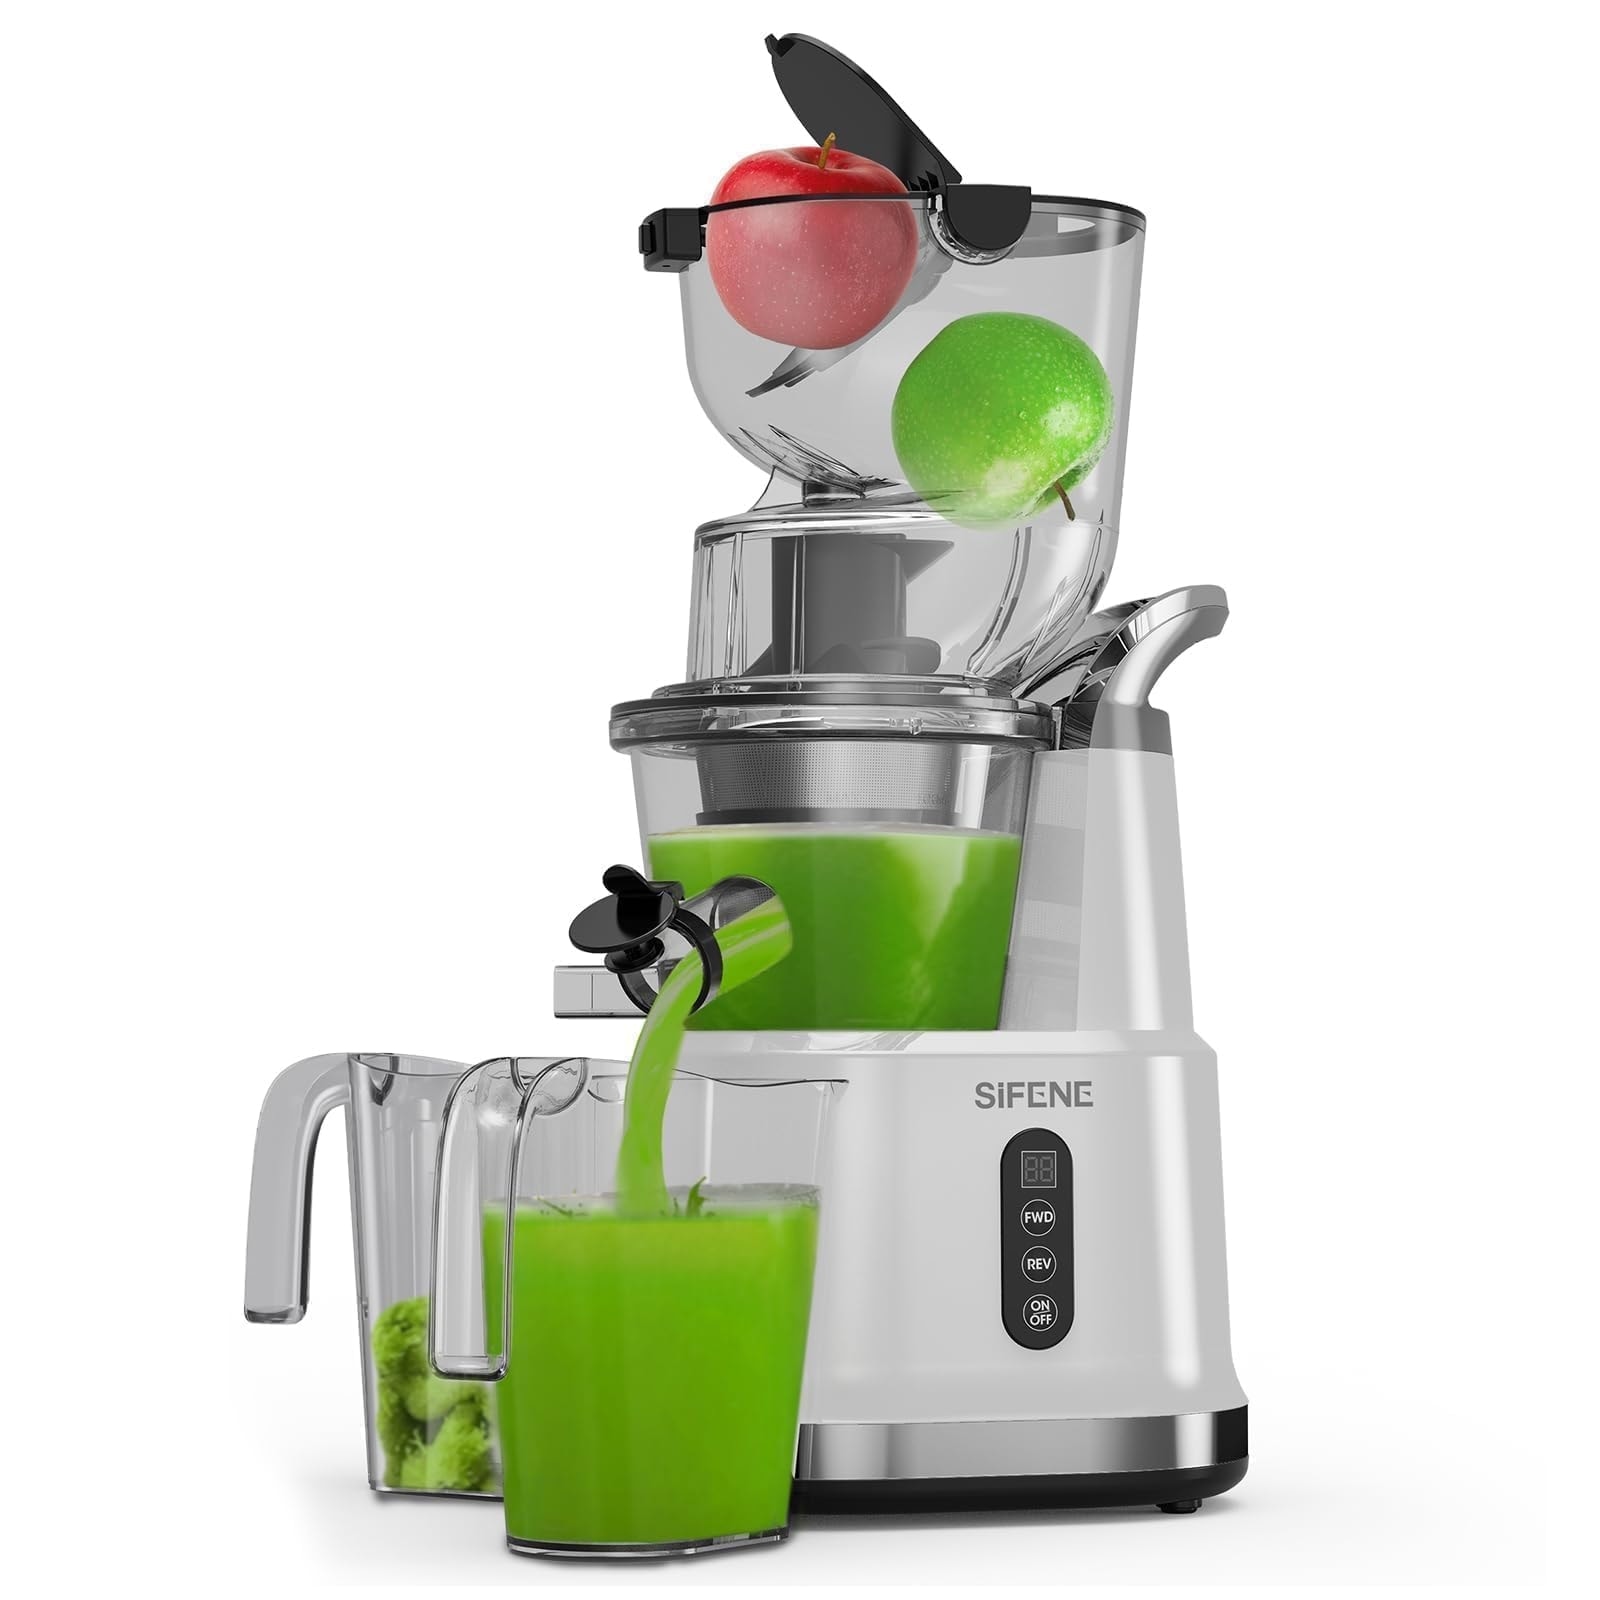 https://ak1.ostkcdn.com/images/products/is/images/direct/329555e33c45394d9f027bf04a90fcdb50c3ab16/Easy-Use-Cold-Press-Juicer%2C-83mm-Wide-Mouth-Vertical-Slow-Masticating-Juicer%2C-BPA-Free%2C-Quiet-Motor-with-Reverse-Function-White.jpg